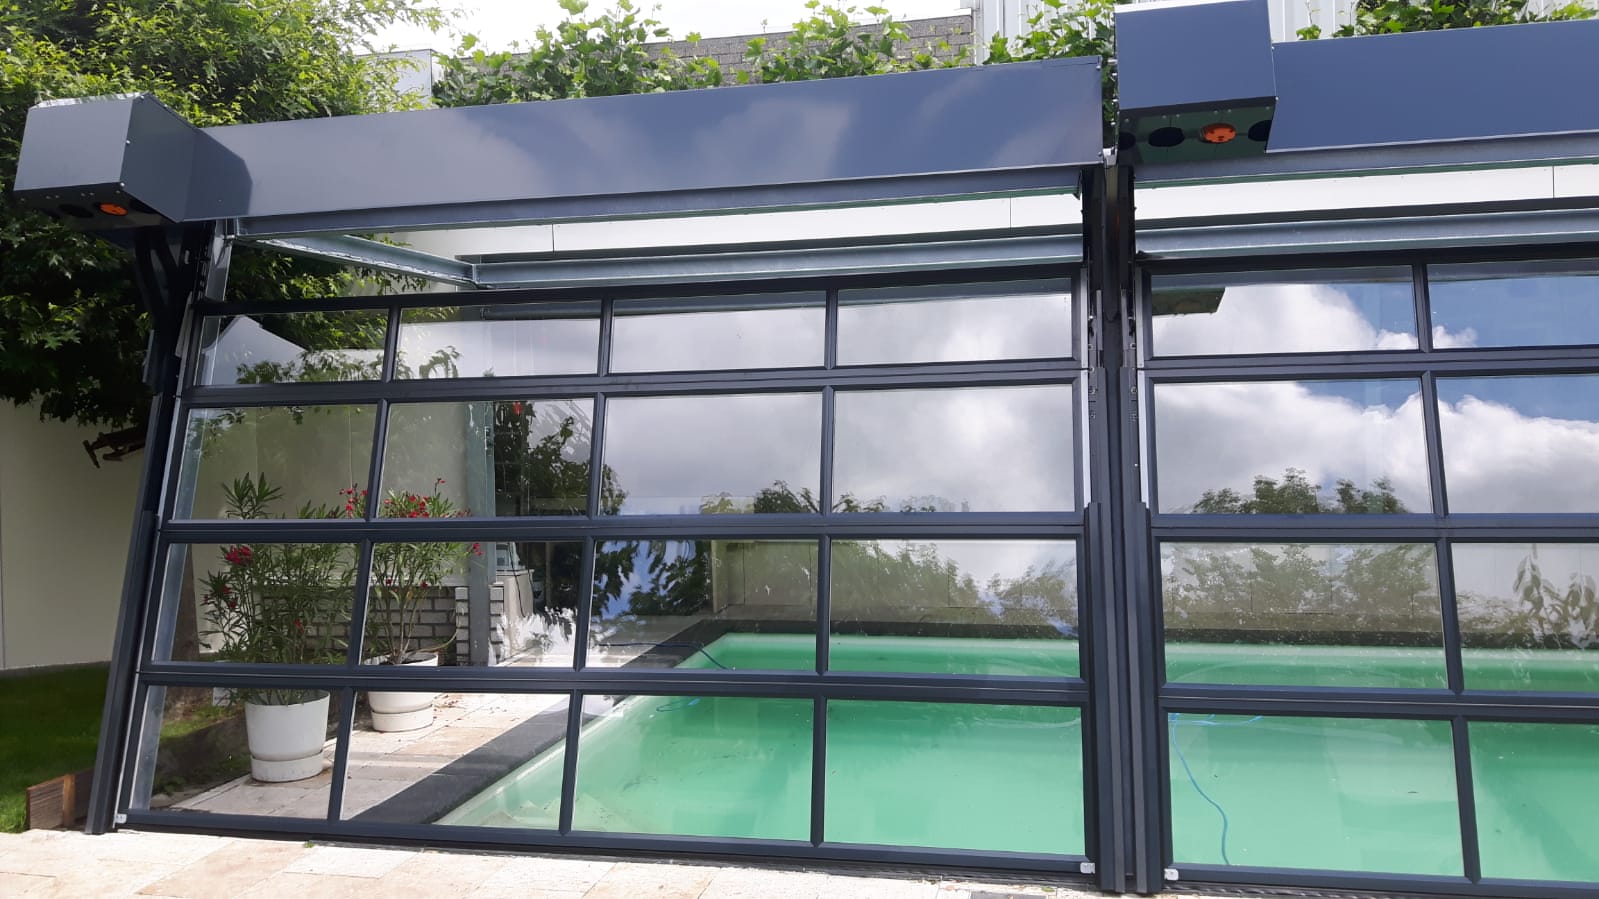 All-weather pool with Compact roller doors - Compact Rolflex